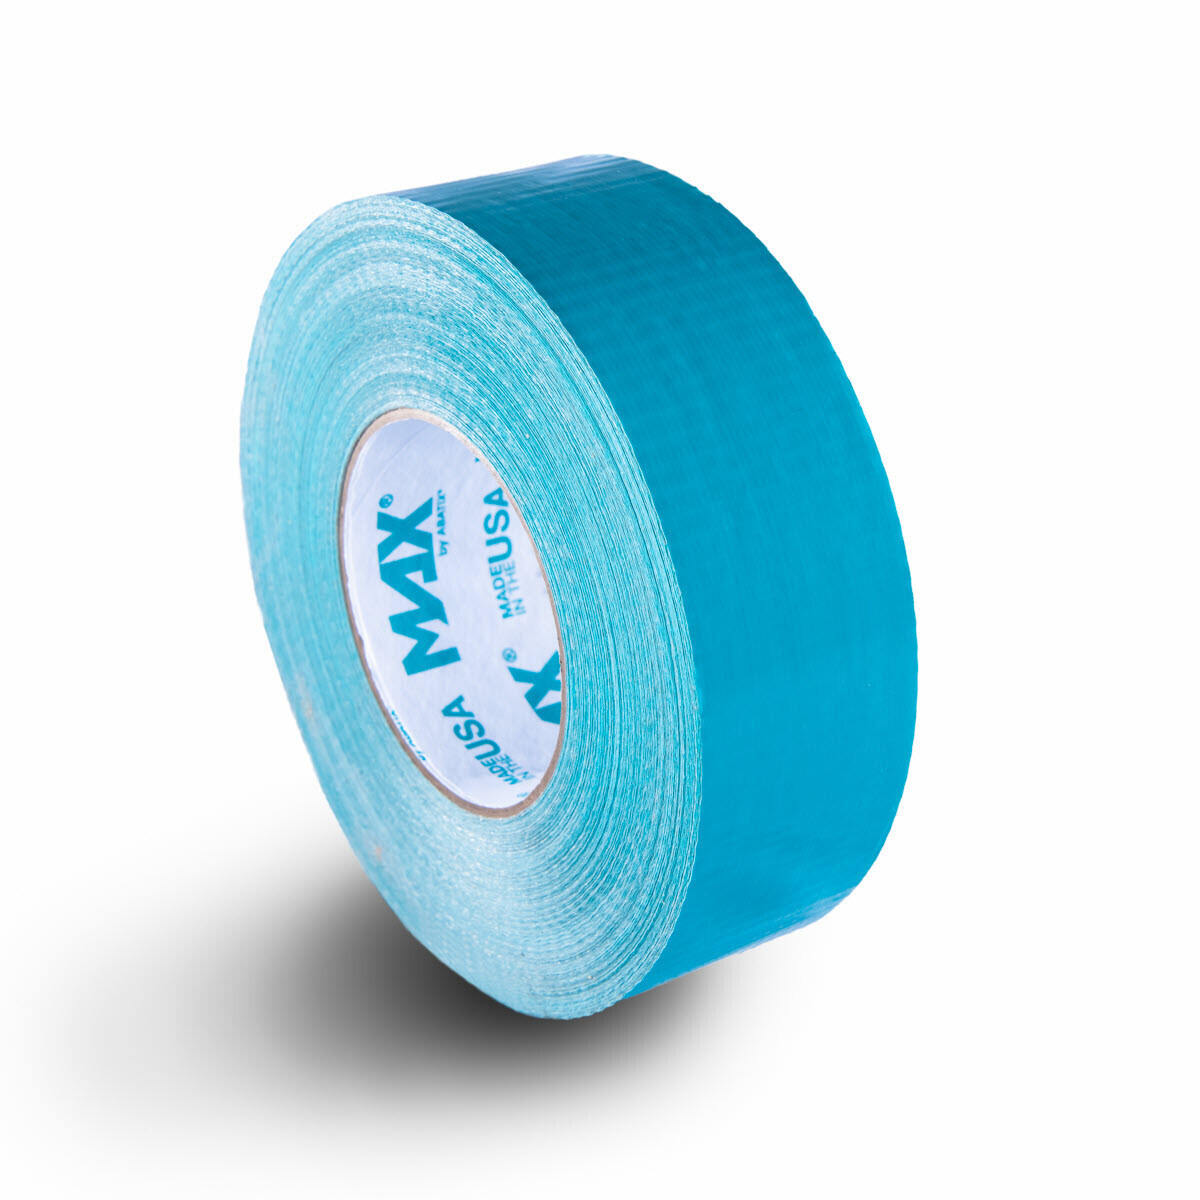 MAX™ by ABATIX™ Teal Blue Duct Tape, 11mil, 2 Inch, 1 Roll